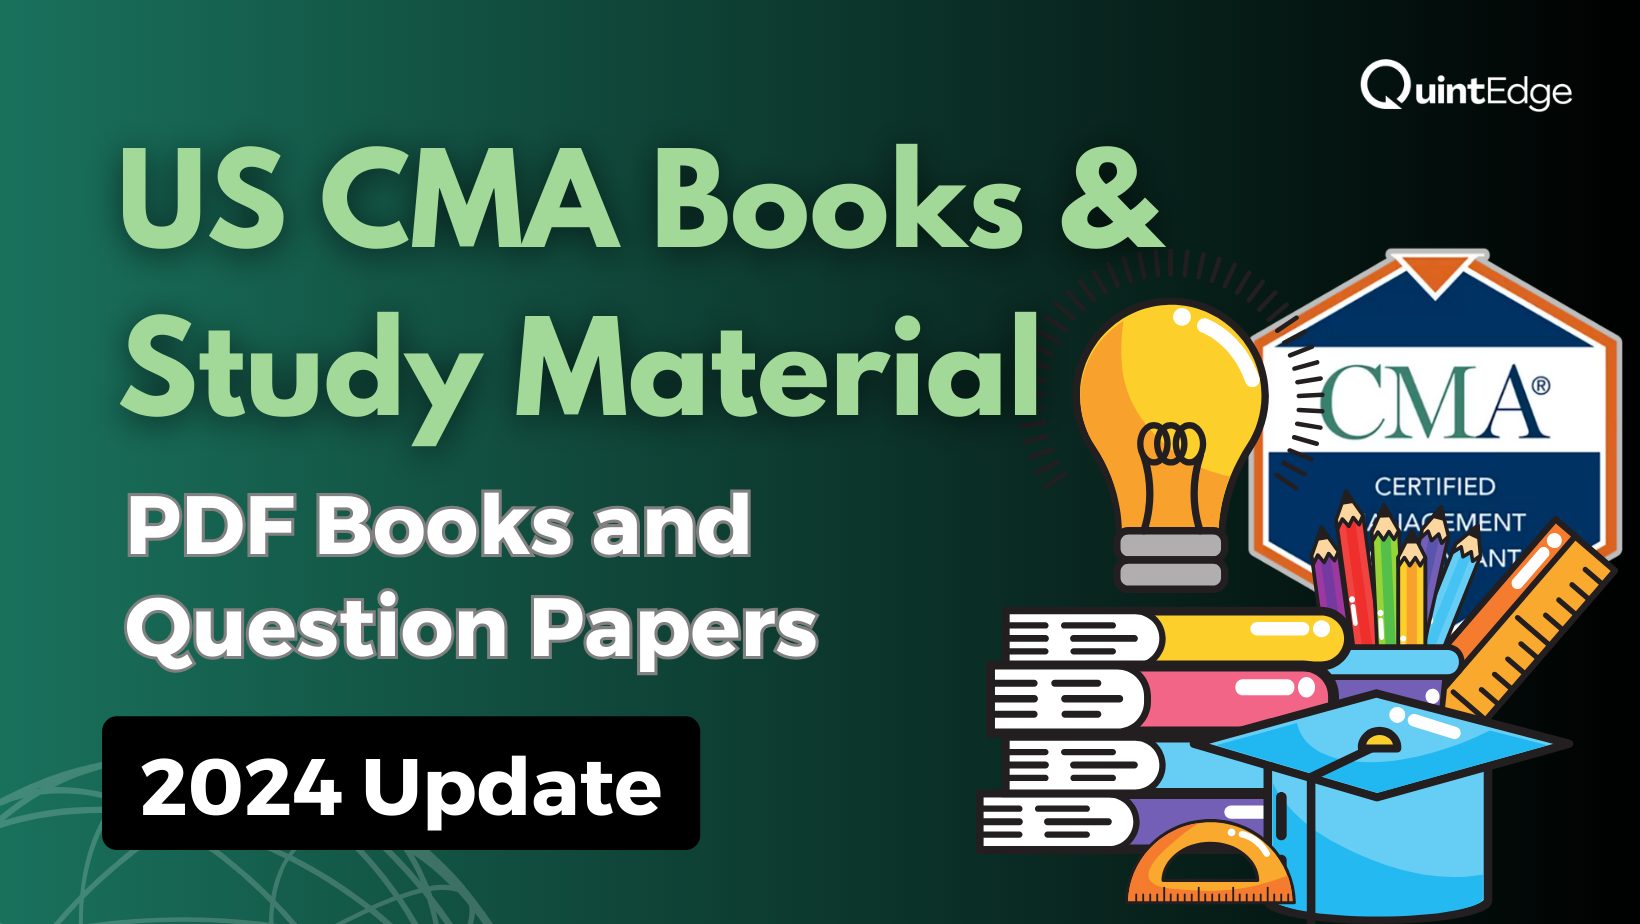 US CMA Books & Study Material PDF Books, Question Papers and more